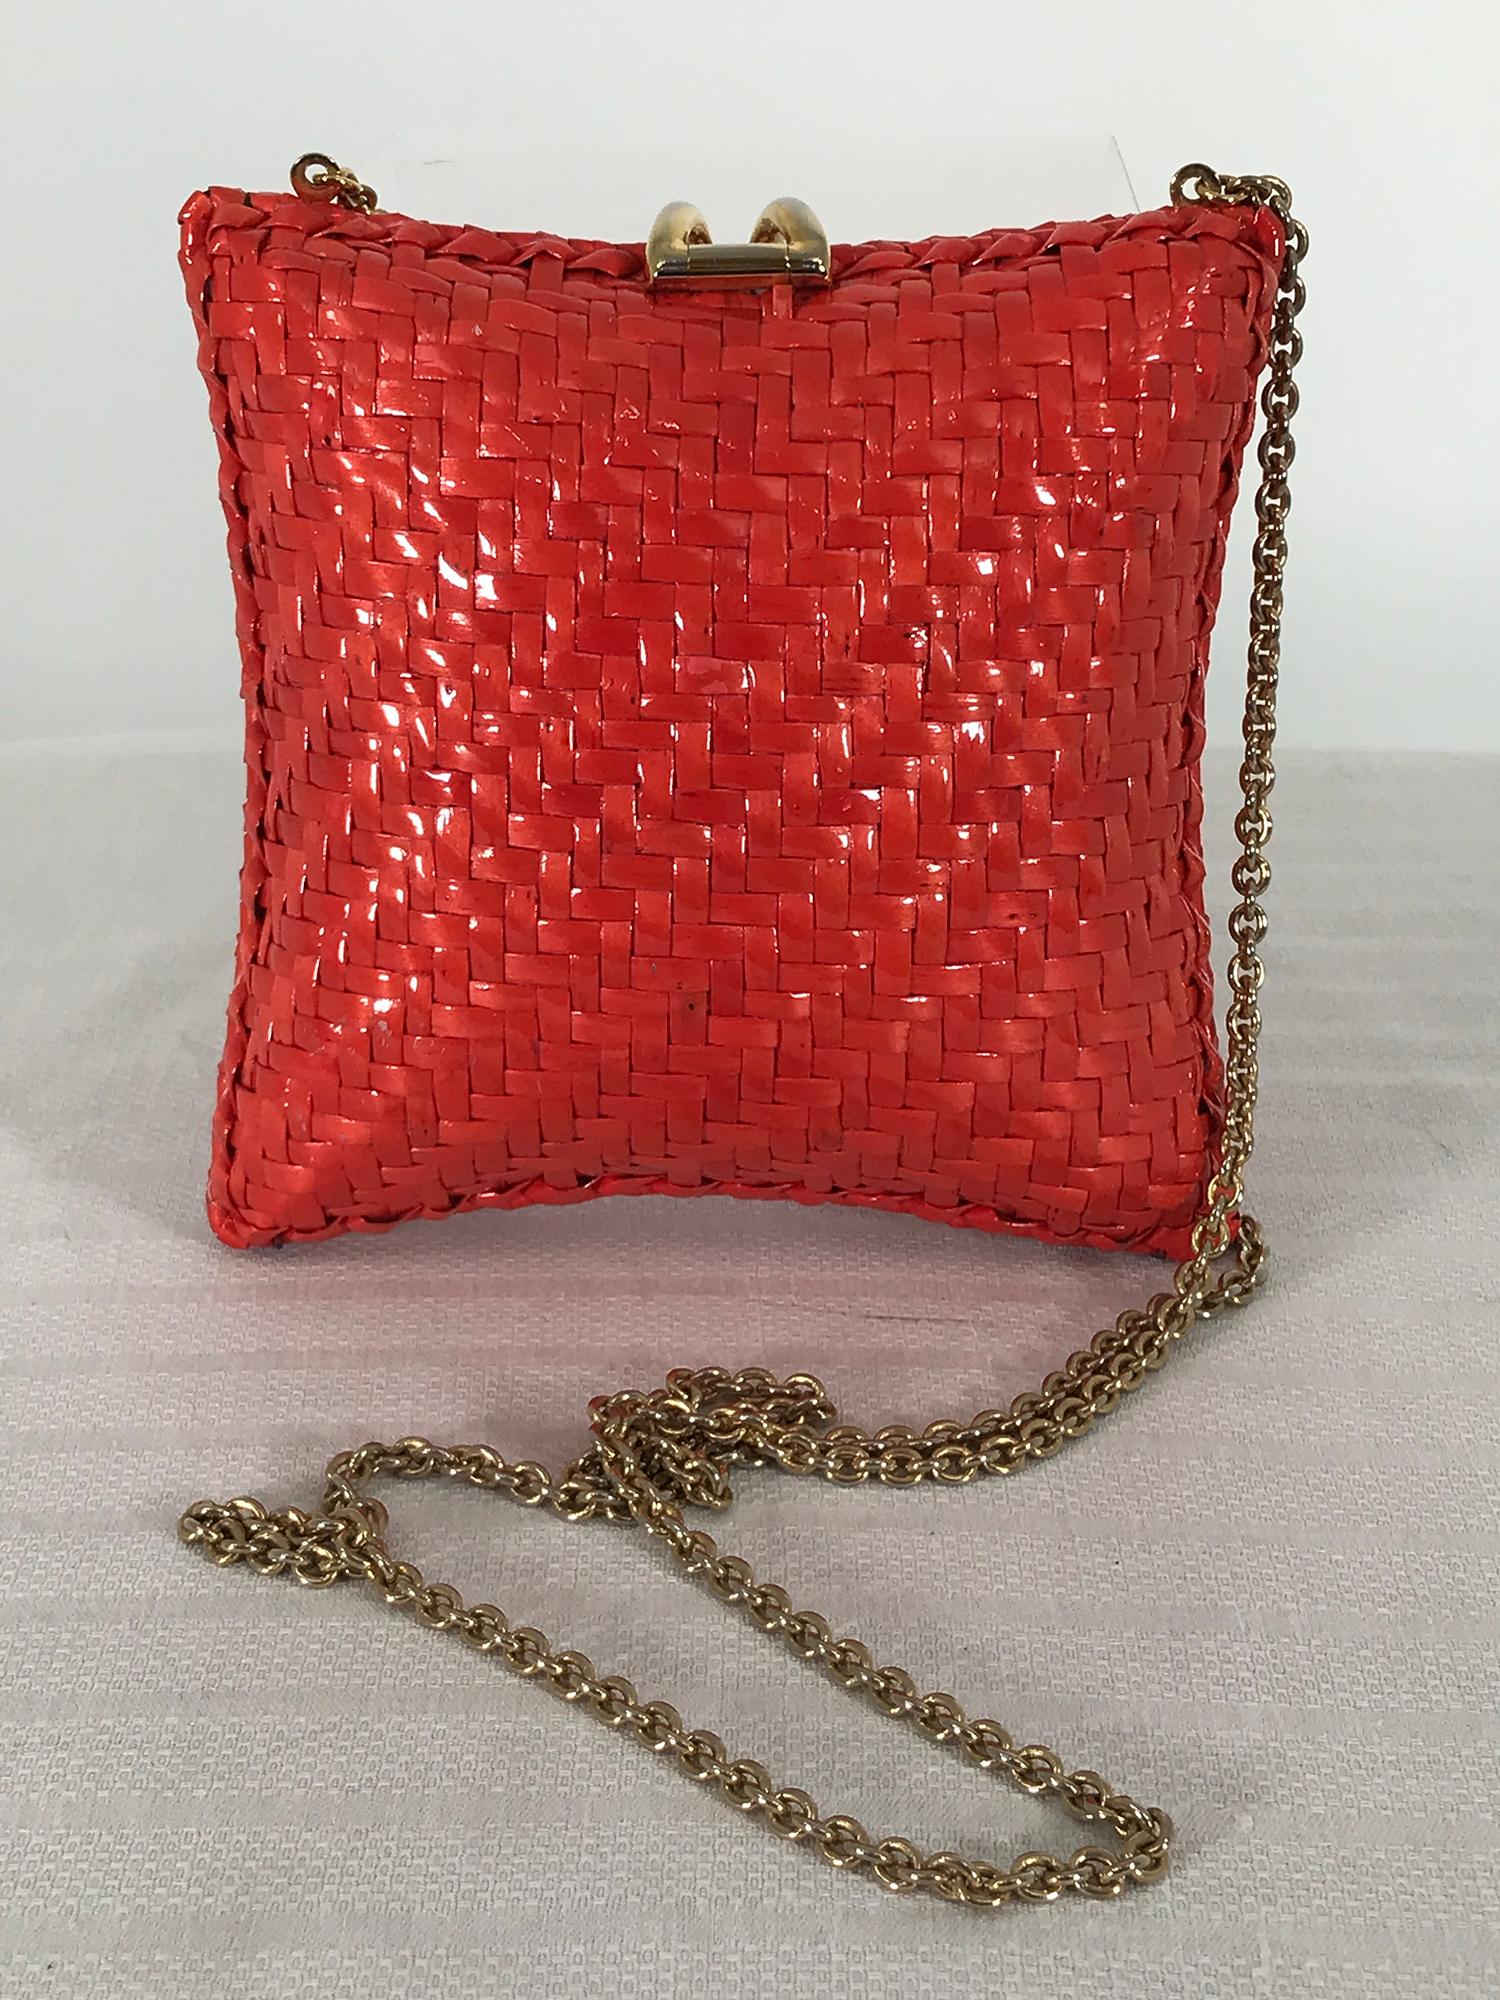 RODO Italy square orange wicker, thin gold chain shoulder bag from the 1970s.
Pillow shaped square wicker bag with a glazed orange finish, Long thin gold shoulder length chain. The bag closes with a gold metal flip over clasp, there is wear to the